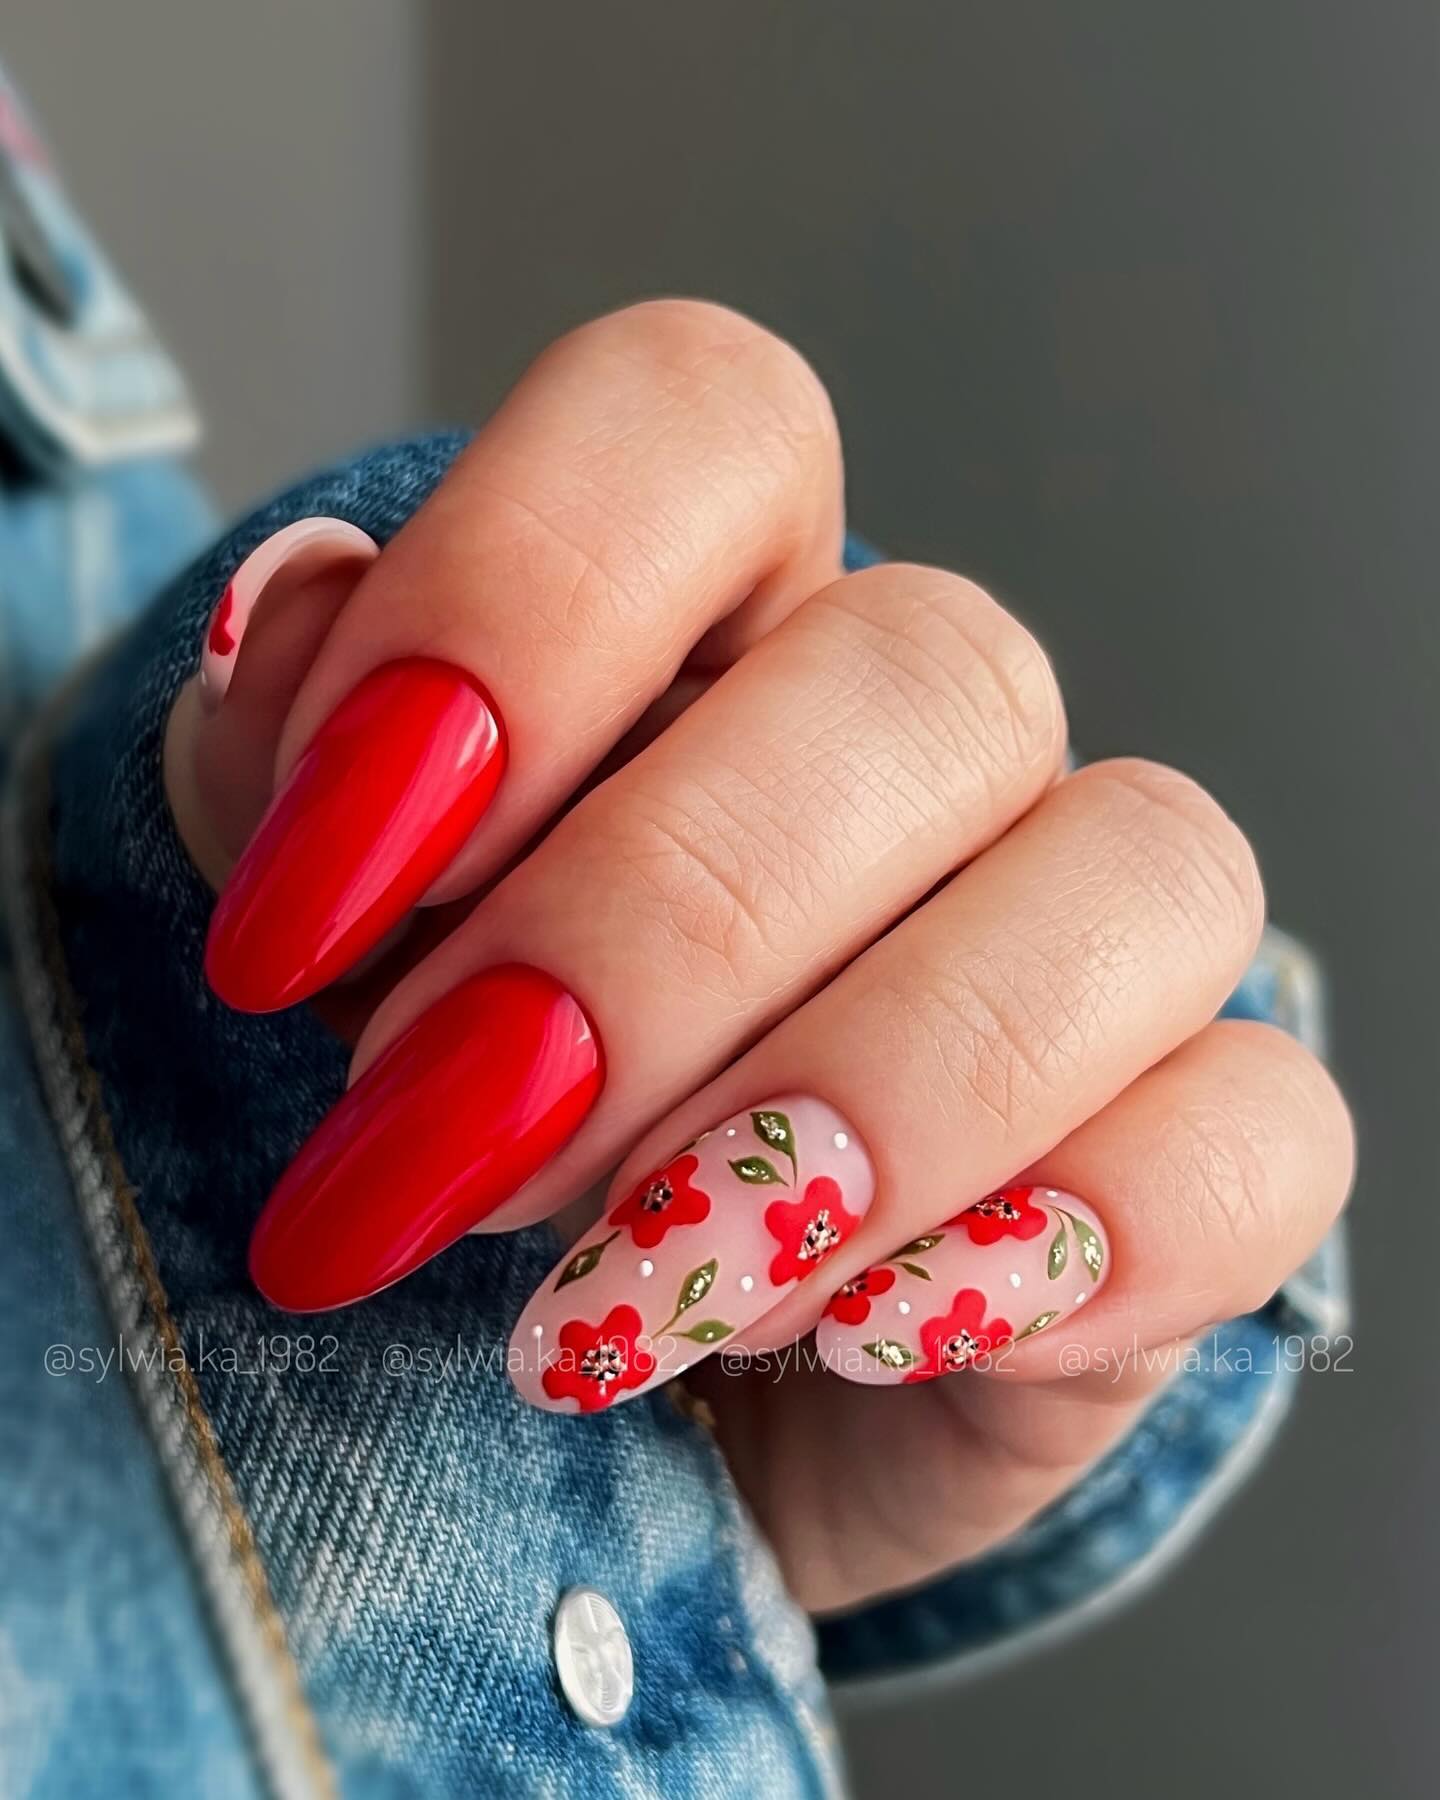 100 Pretty Spring Nail Designs To Try This Year images 104